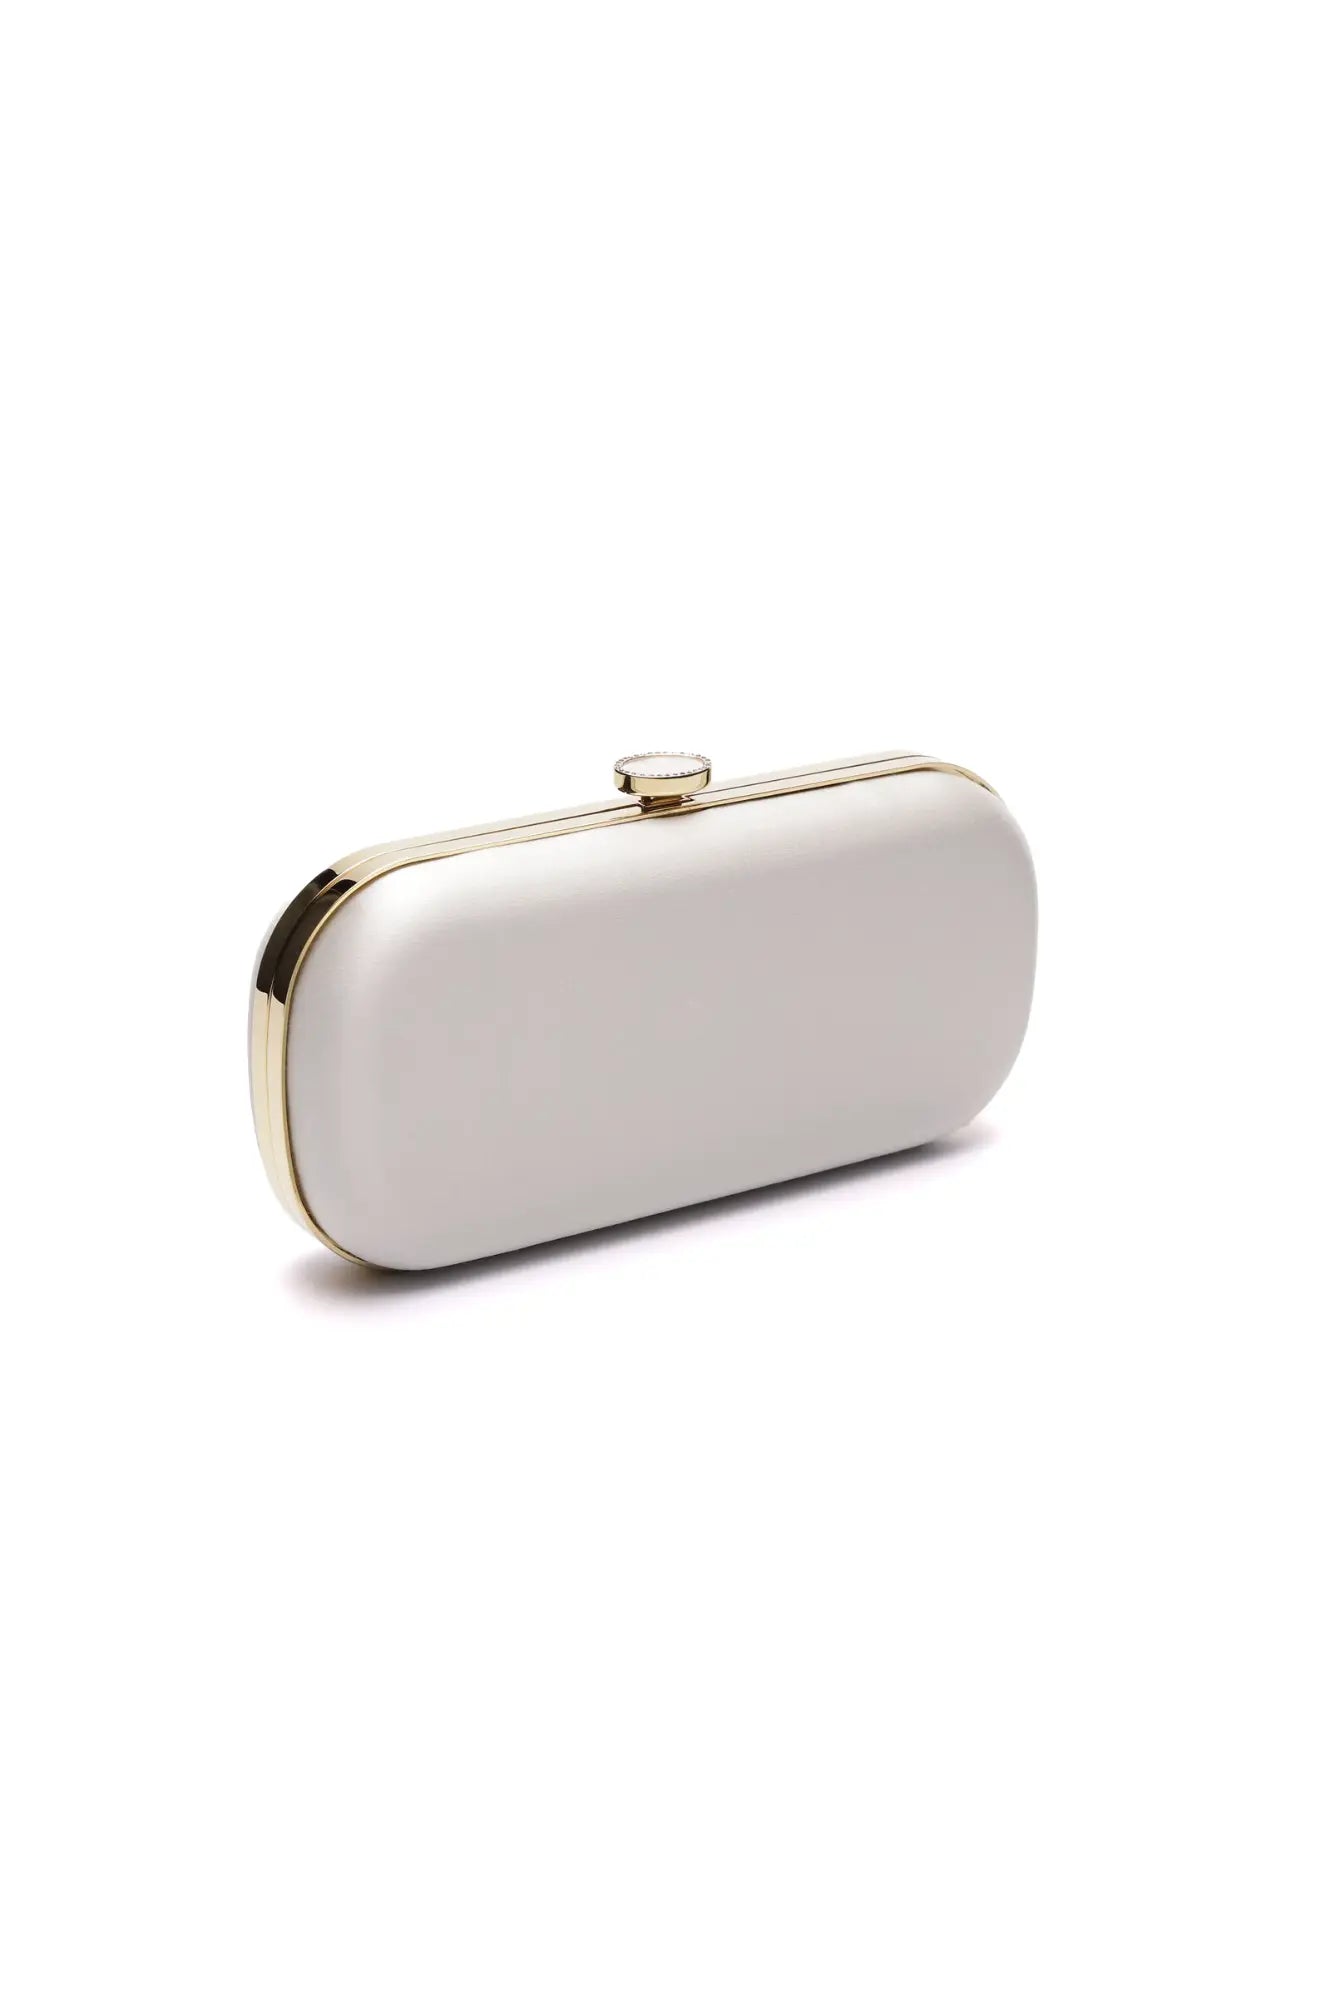 Bella Rosa Collection Ivory Duchess Satin clutch purse with gold-tone hardware against a plain background.